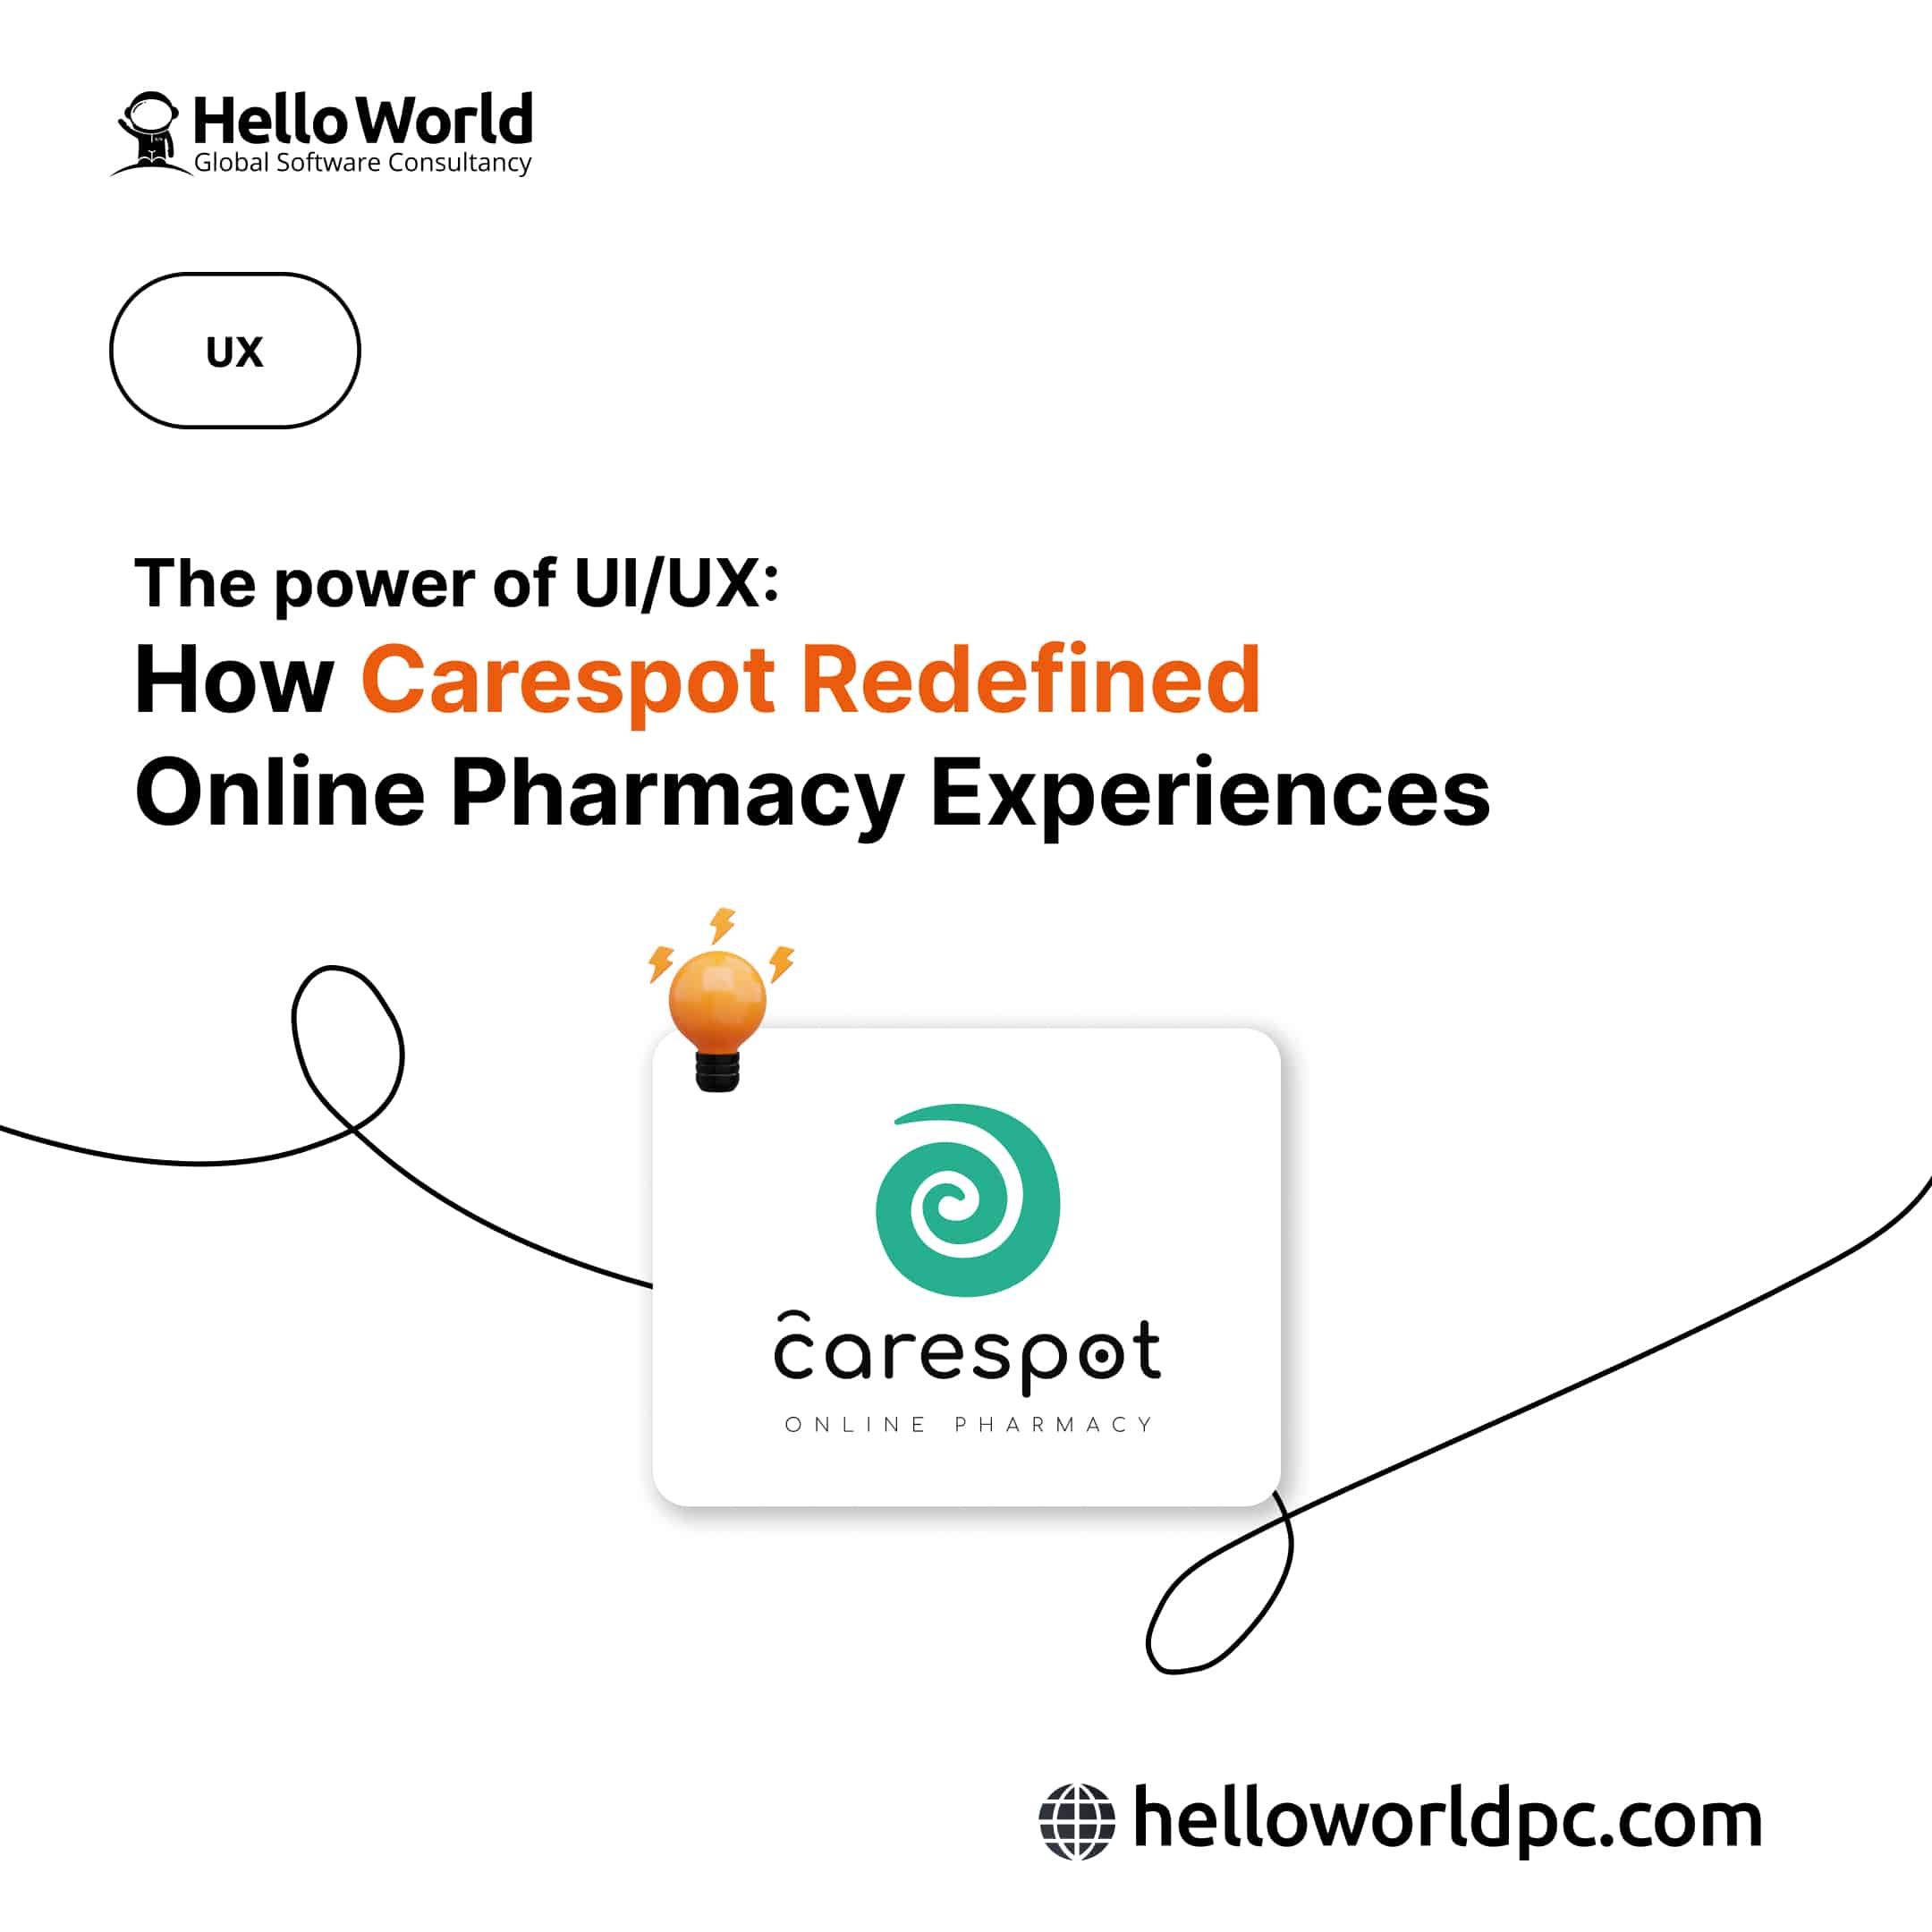 The power of UI/UX: How Carespot Redefined Online Pharmacy Experiences